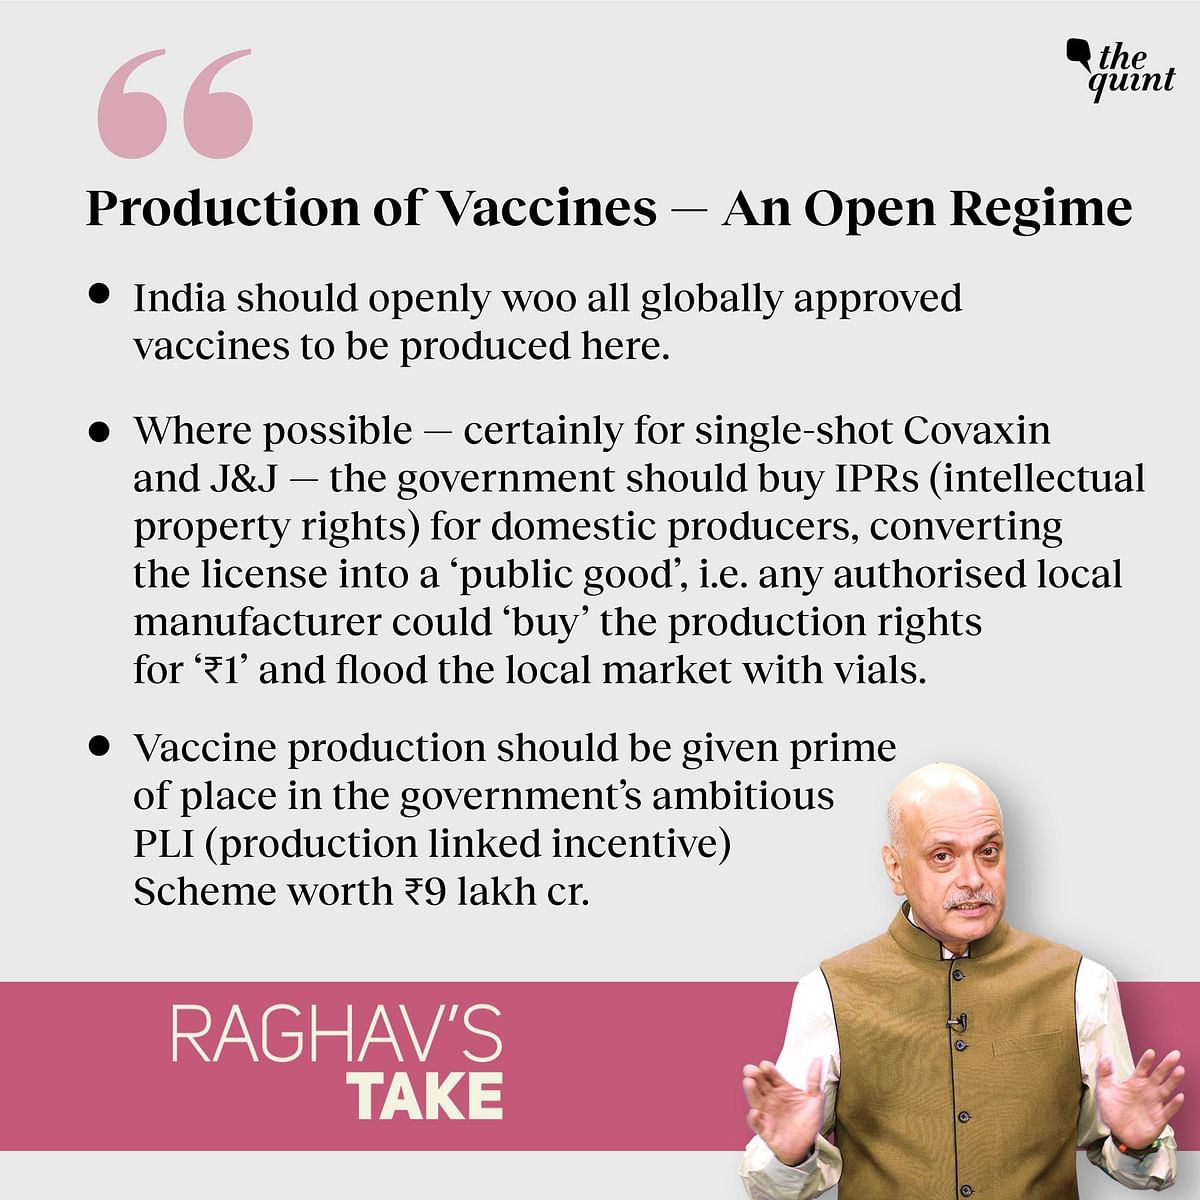 VISHNU — ‘Vaccine Investment & Strategically Heightened Nirmaan Undertaking’ —  could be exactly what India needs.